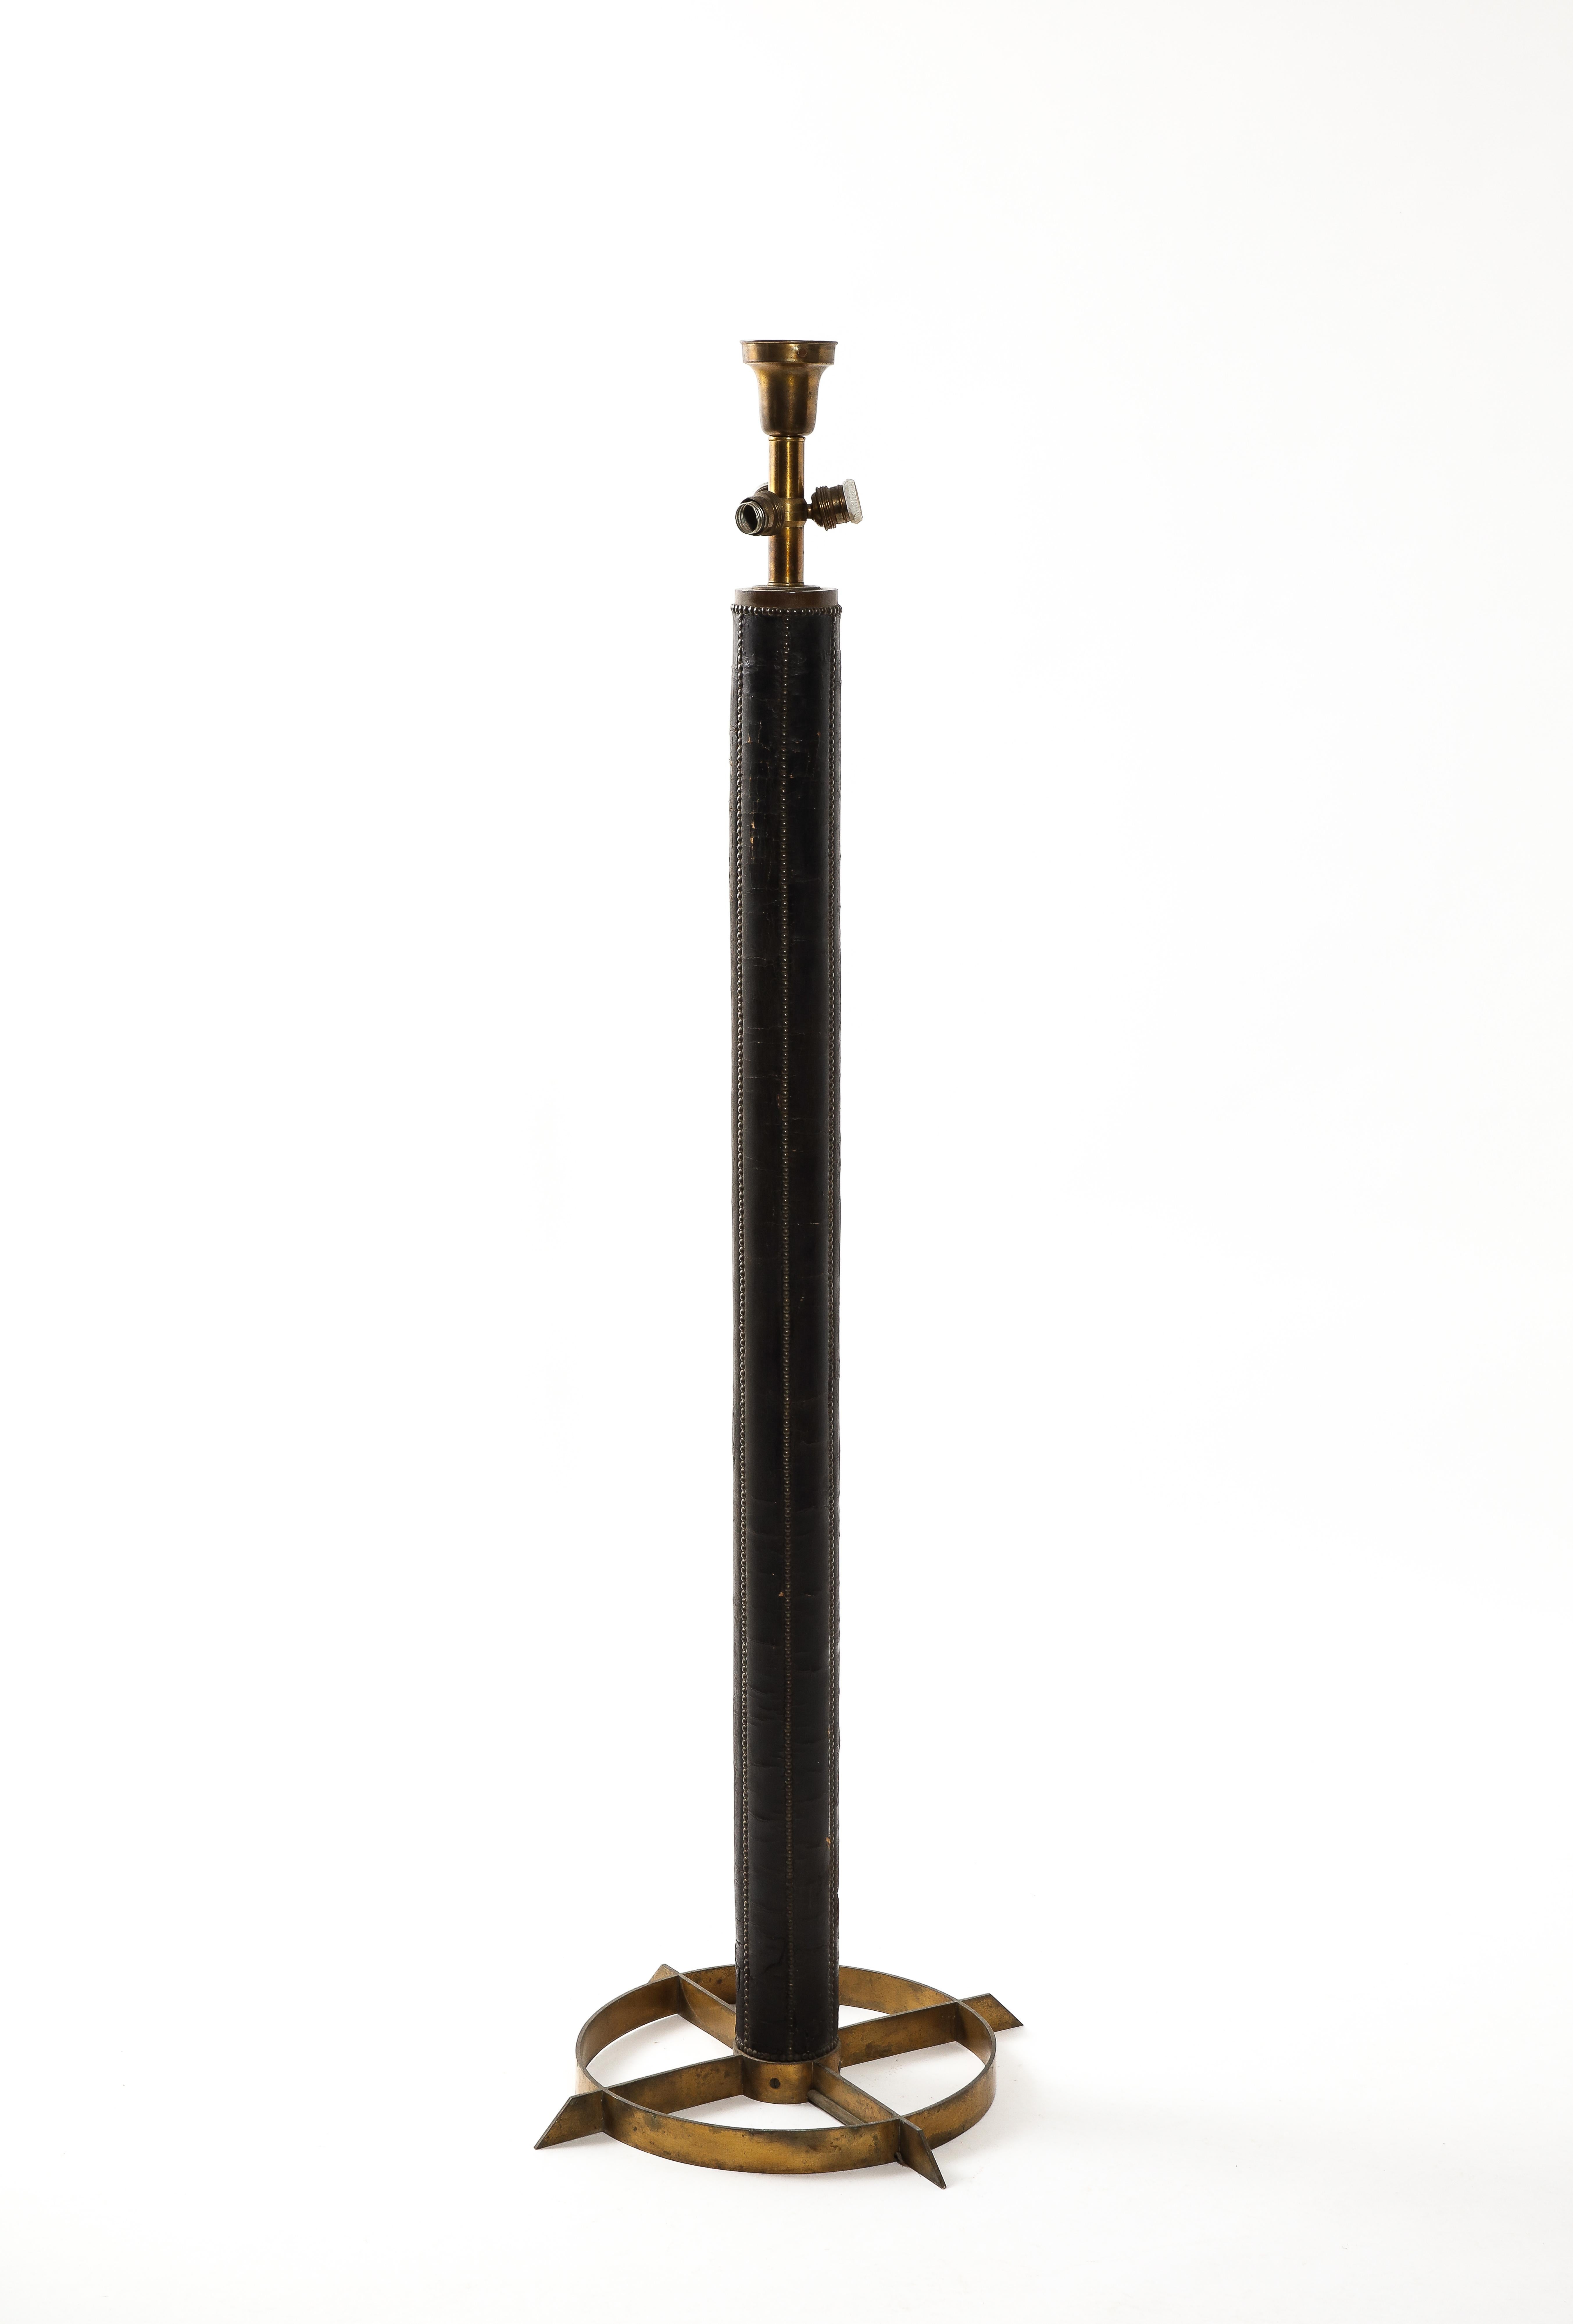 Nail Studded Leather Floor Lamp, France 1960s For Sale 4